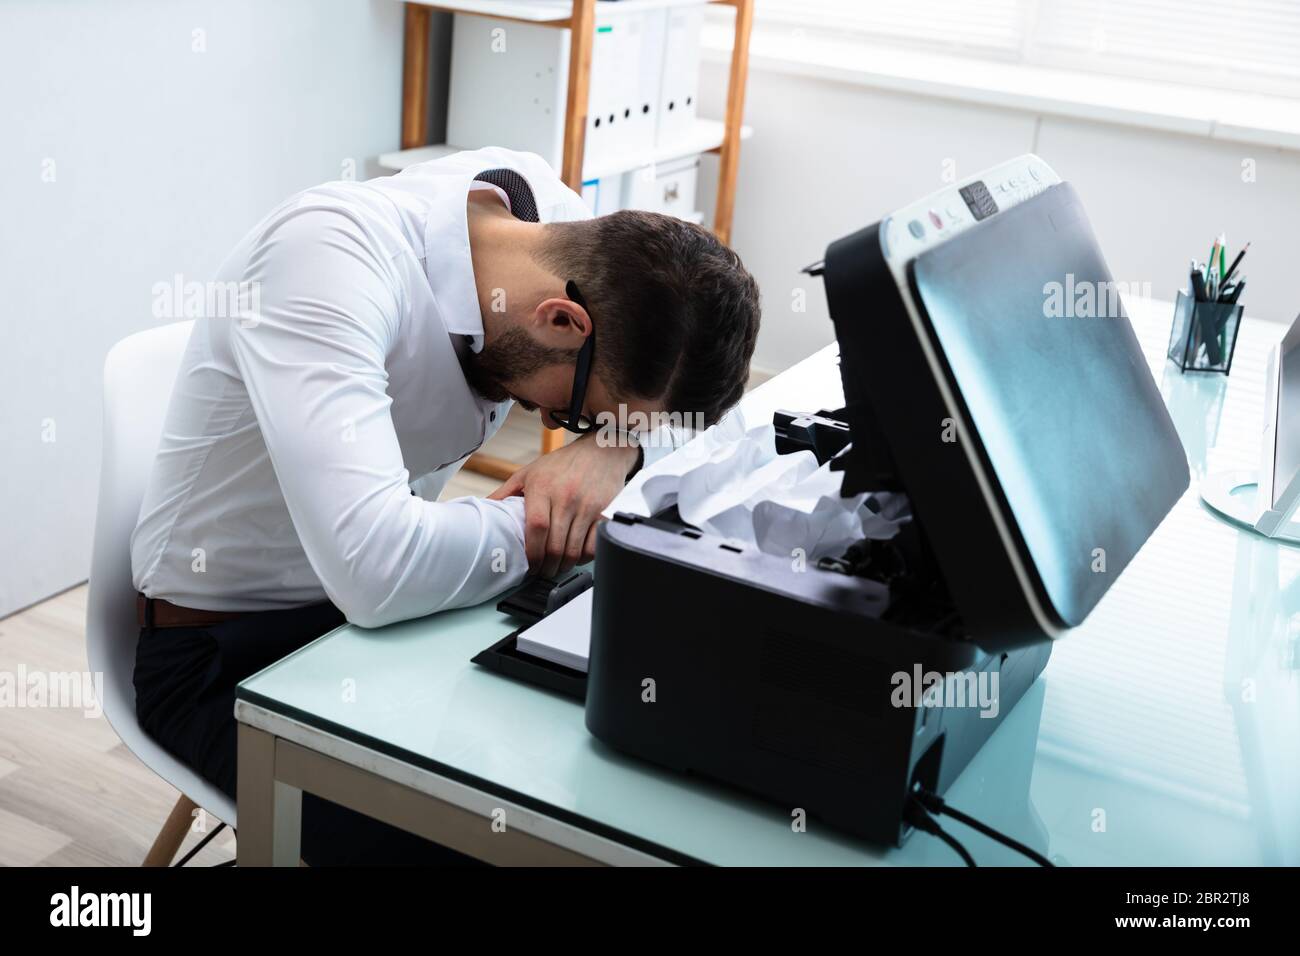 Tired Businessman Resting His Head In Front Of Paper Stuck In Printer Stock Photo